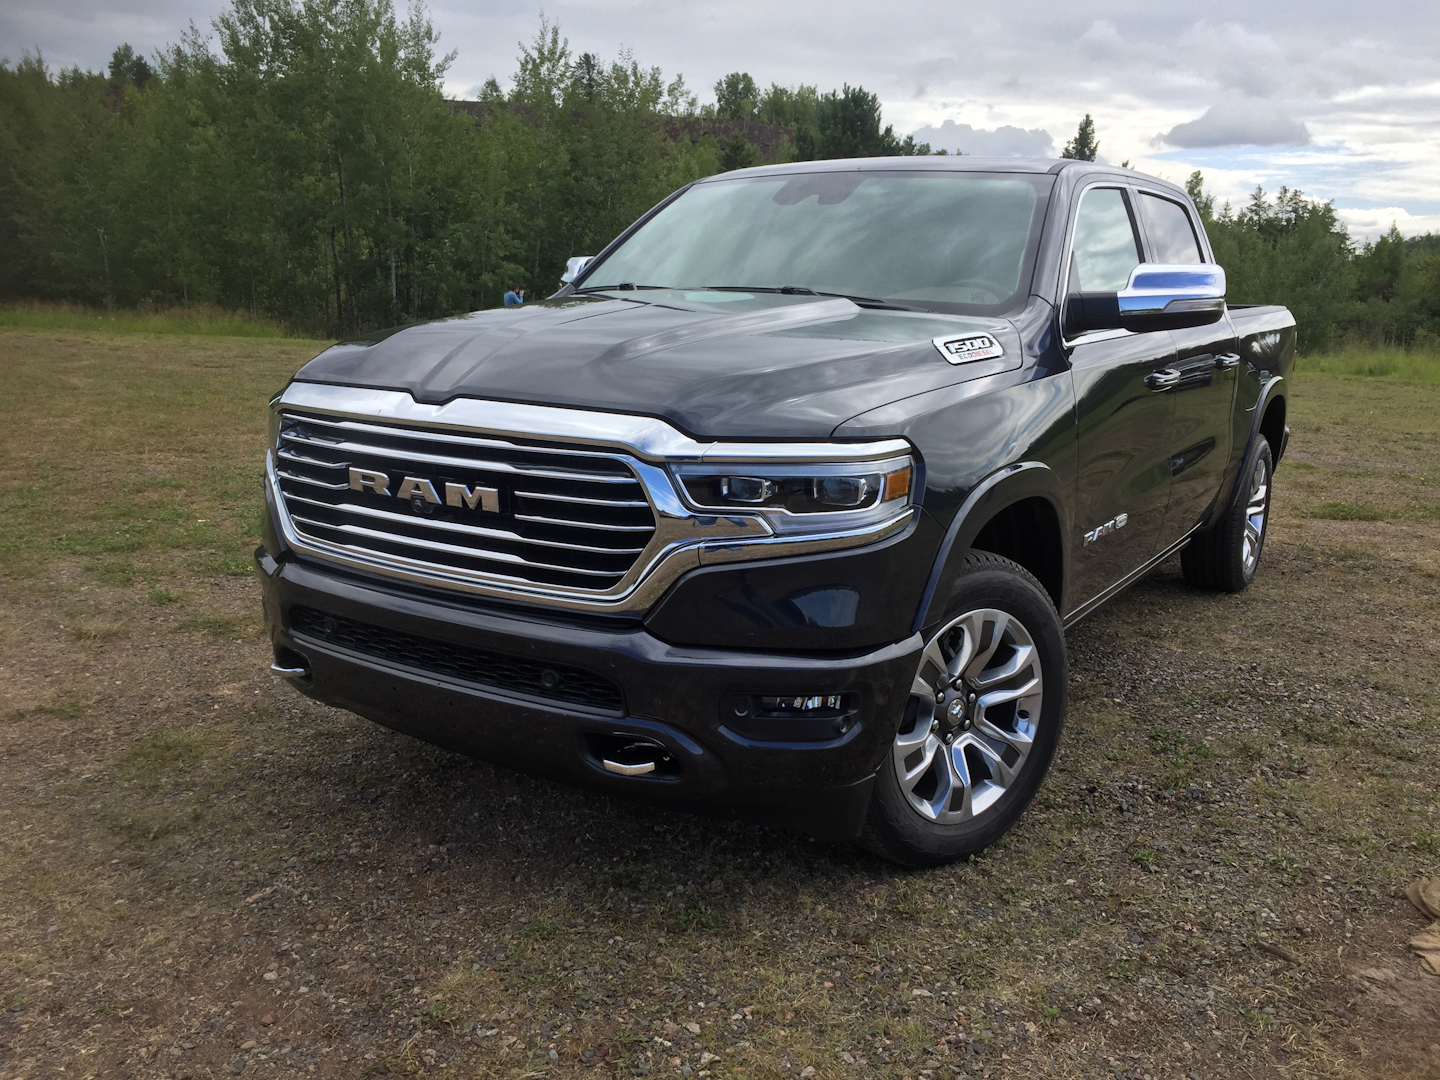 Test Drive 2020 Ram 1500 Ecodiesel Delivers Impressive Power And Fuel Economy Equipment World